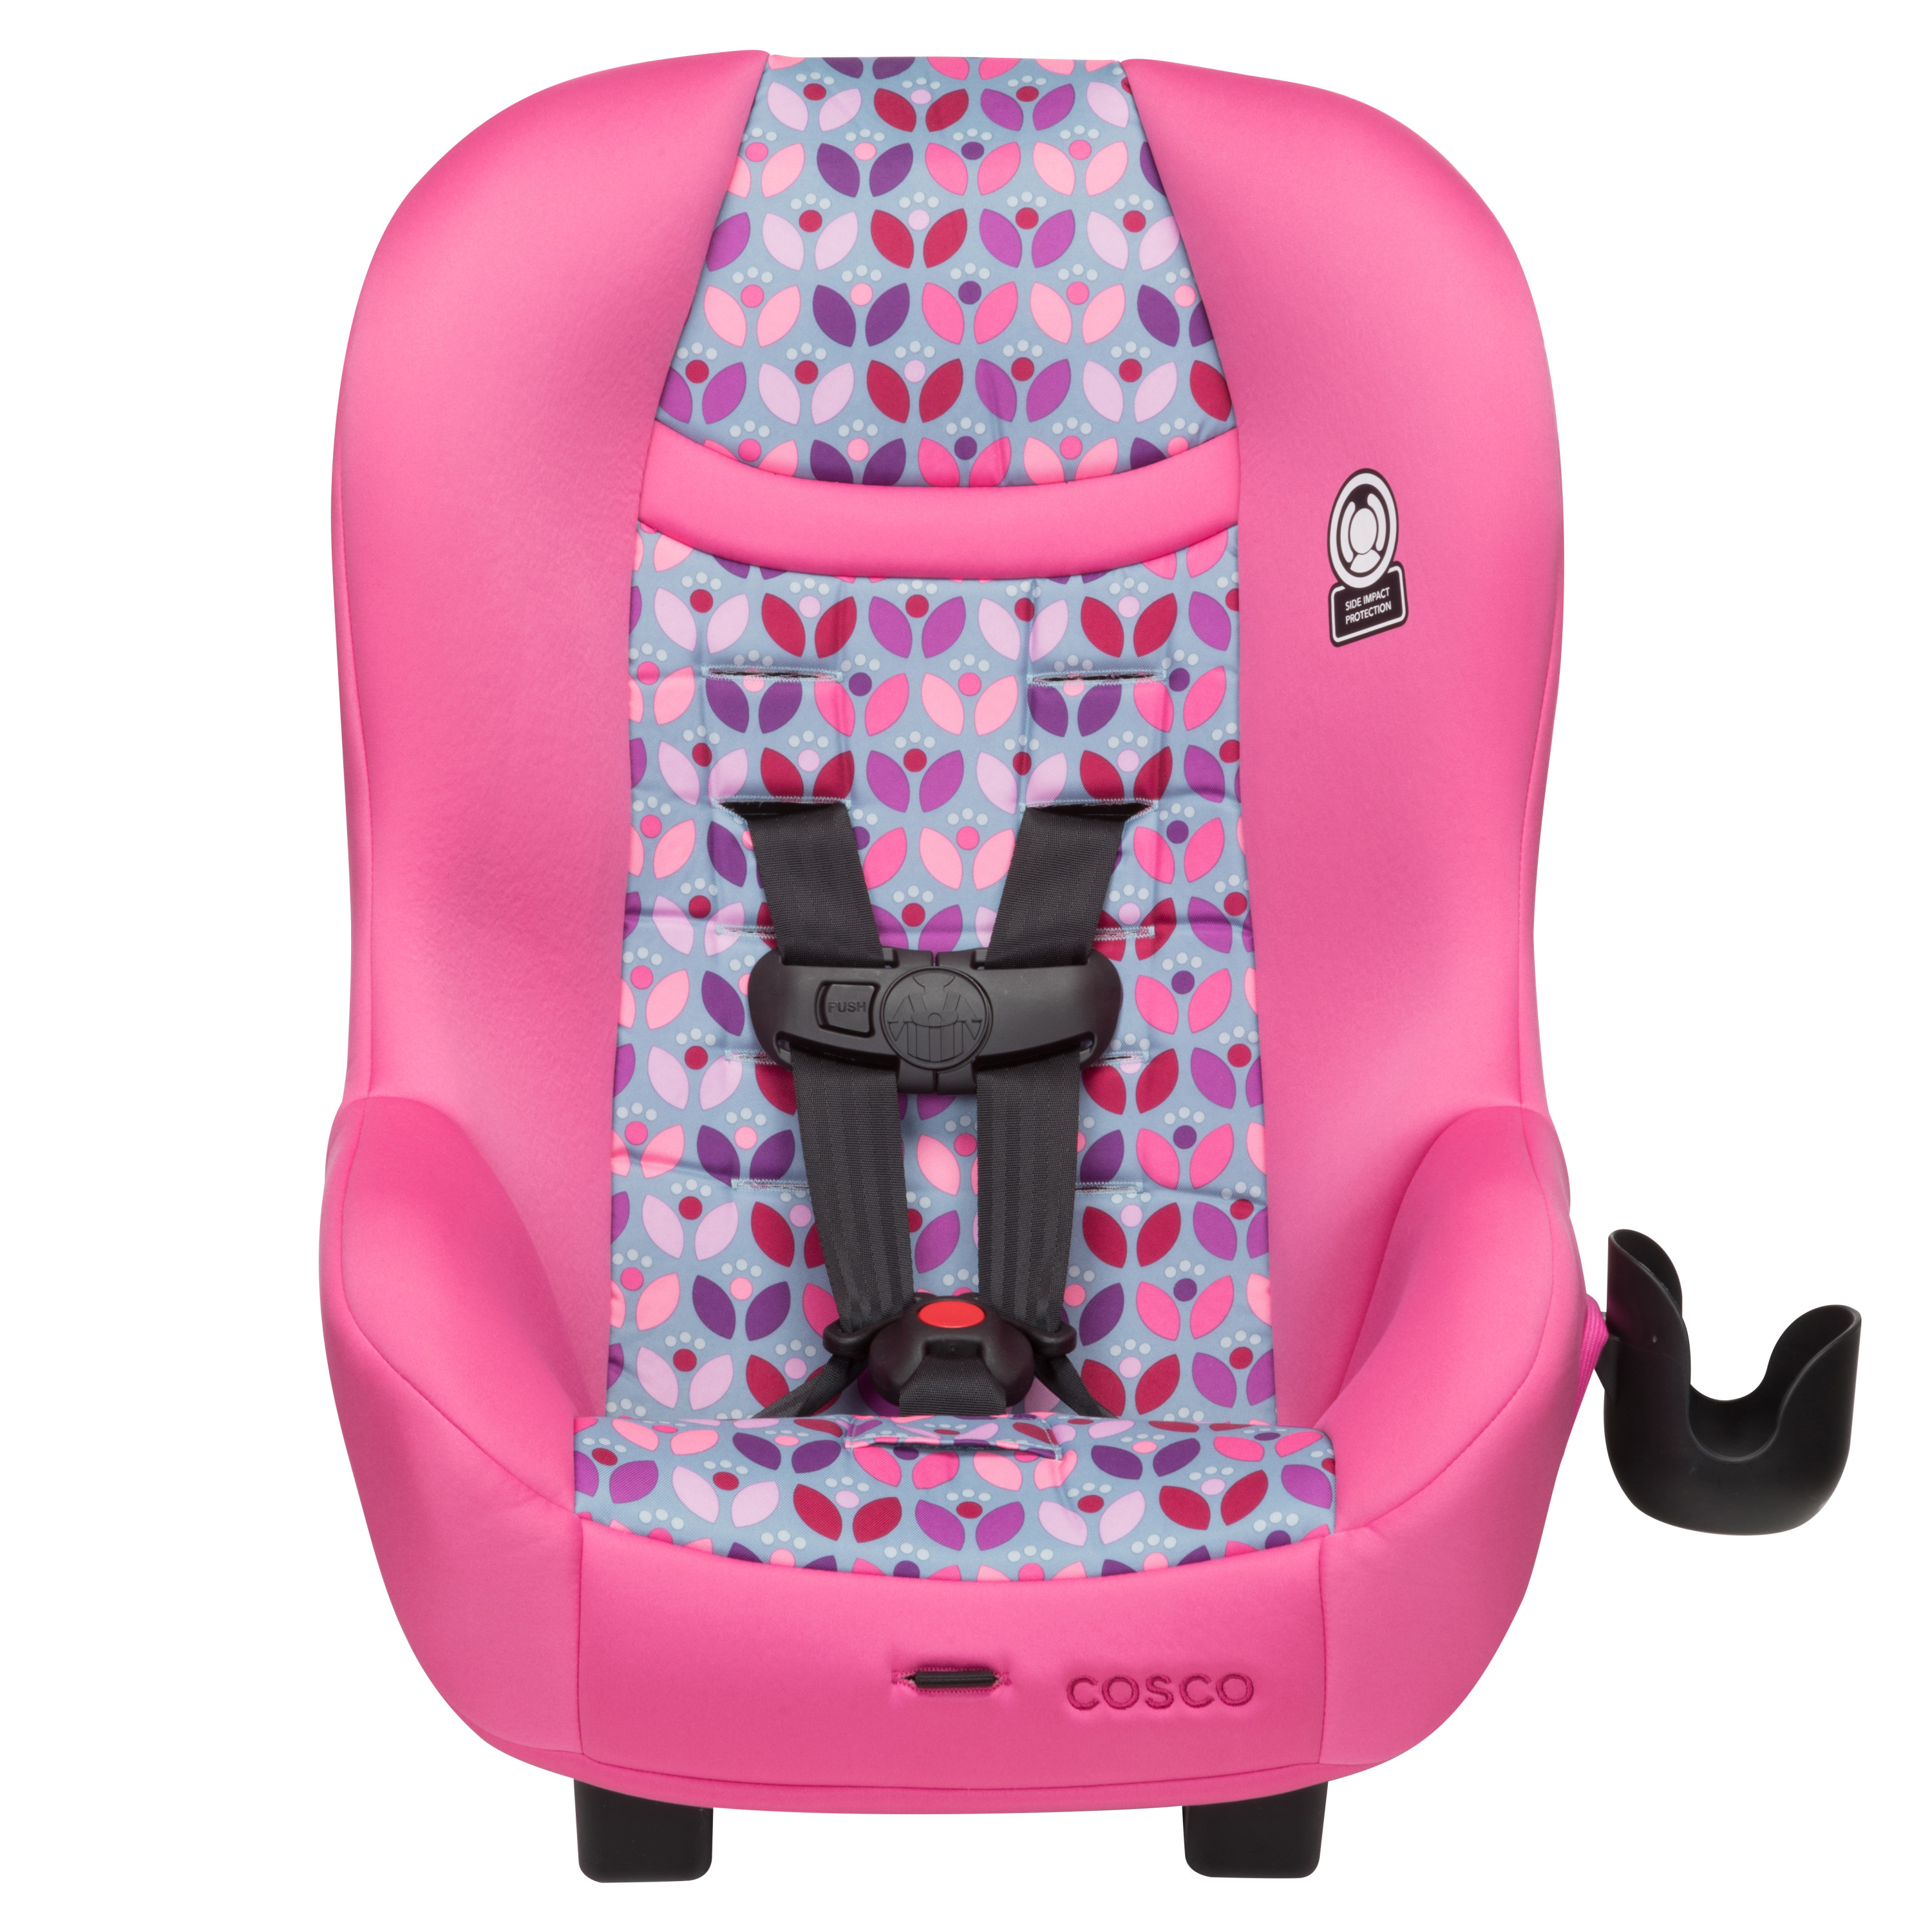 Cosco Scenera Convertible Car Seat, Floral Pink - image 4 of 12